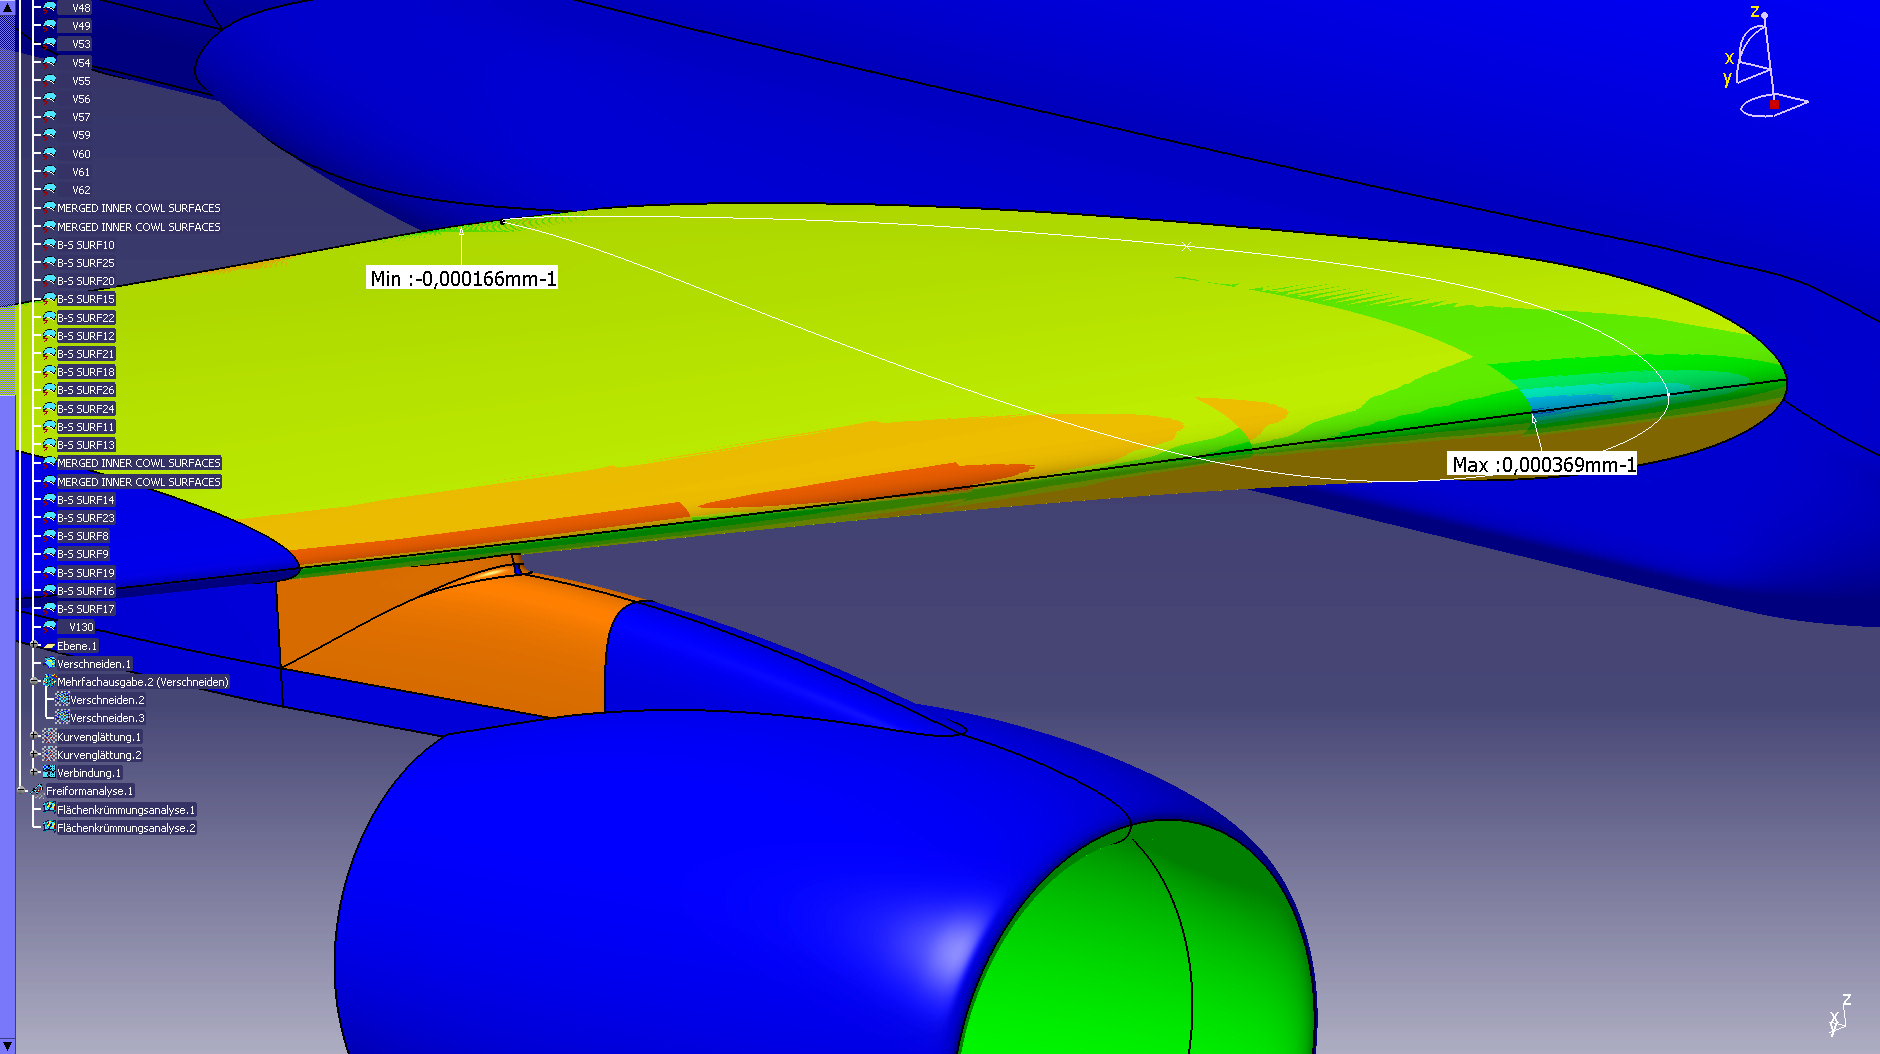 Image of CRM initial CAD curvature for DPW-6